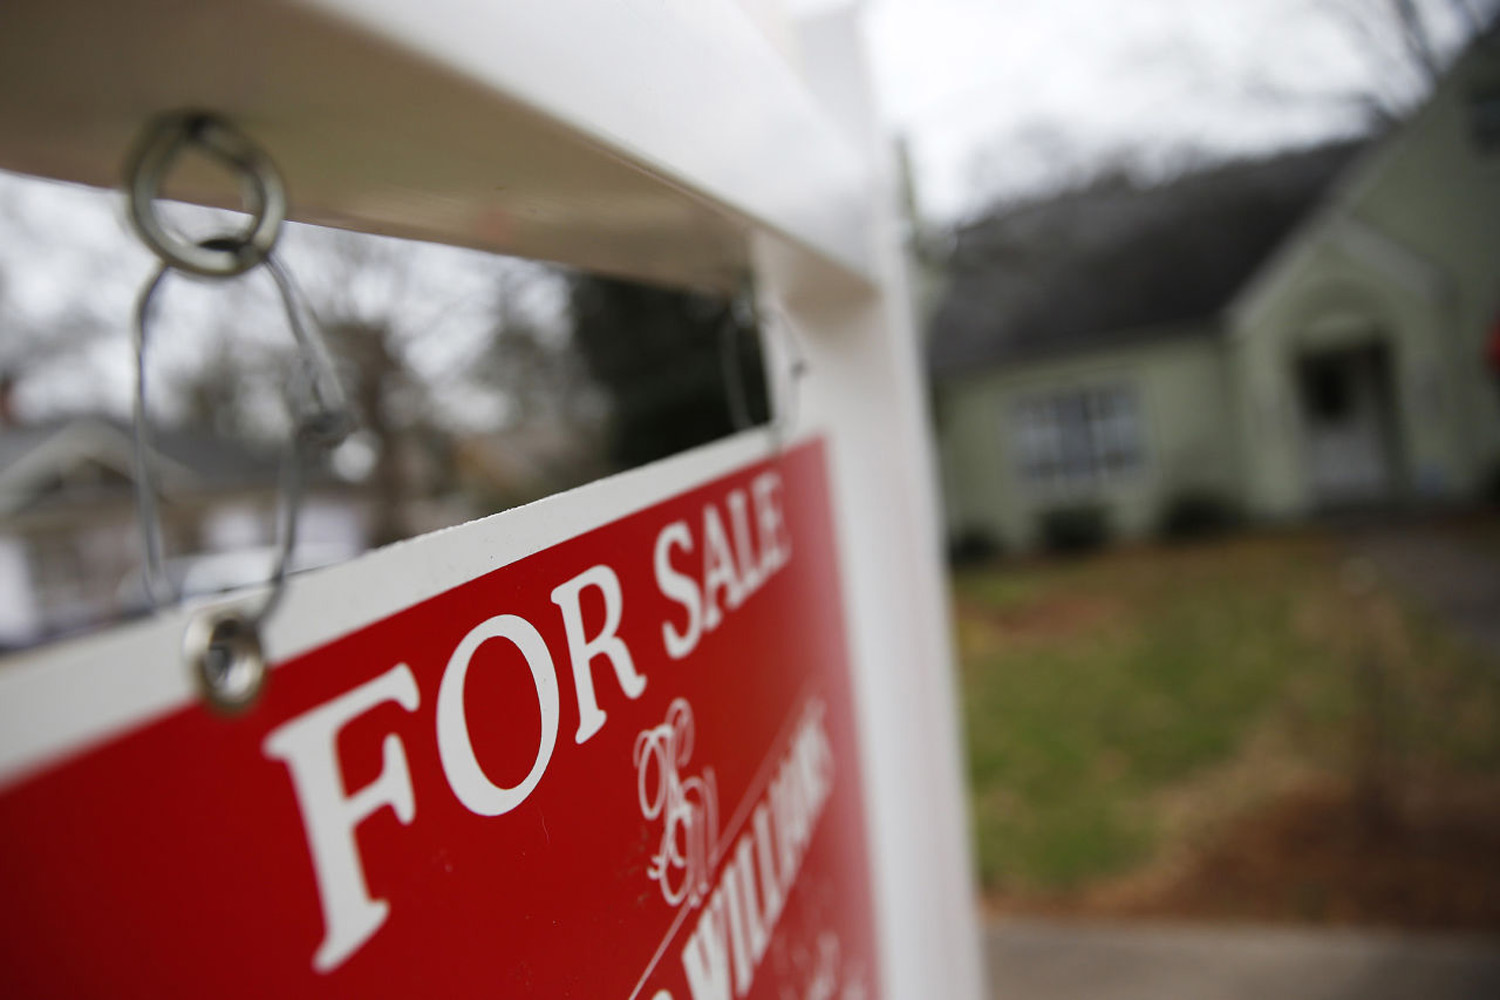 This Jan. 26, 2016 file photo shows a &quot;For Sale&quot; sign hanging in front of an existing home in Atlanta. Short of savings and burdened by debt, America's millennials are struggling to afford their first homes in the face of sharply higher prices in many of the most desirable cities. (John Bazemore/AP)